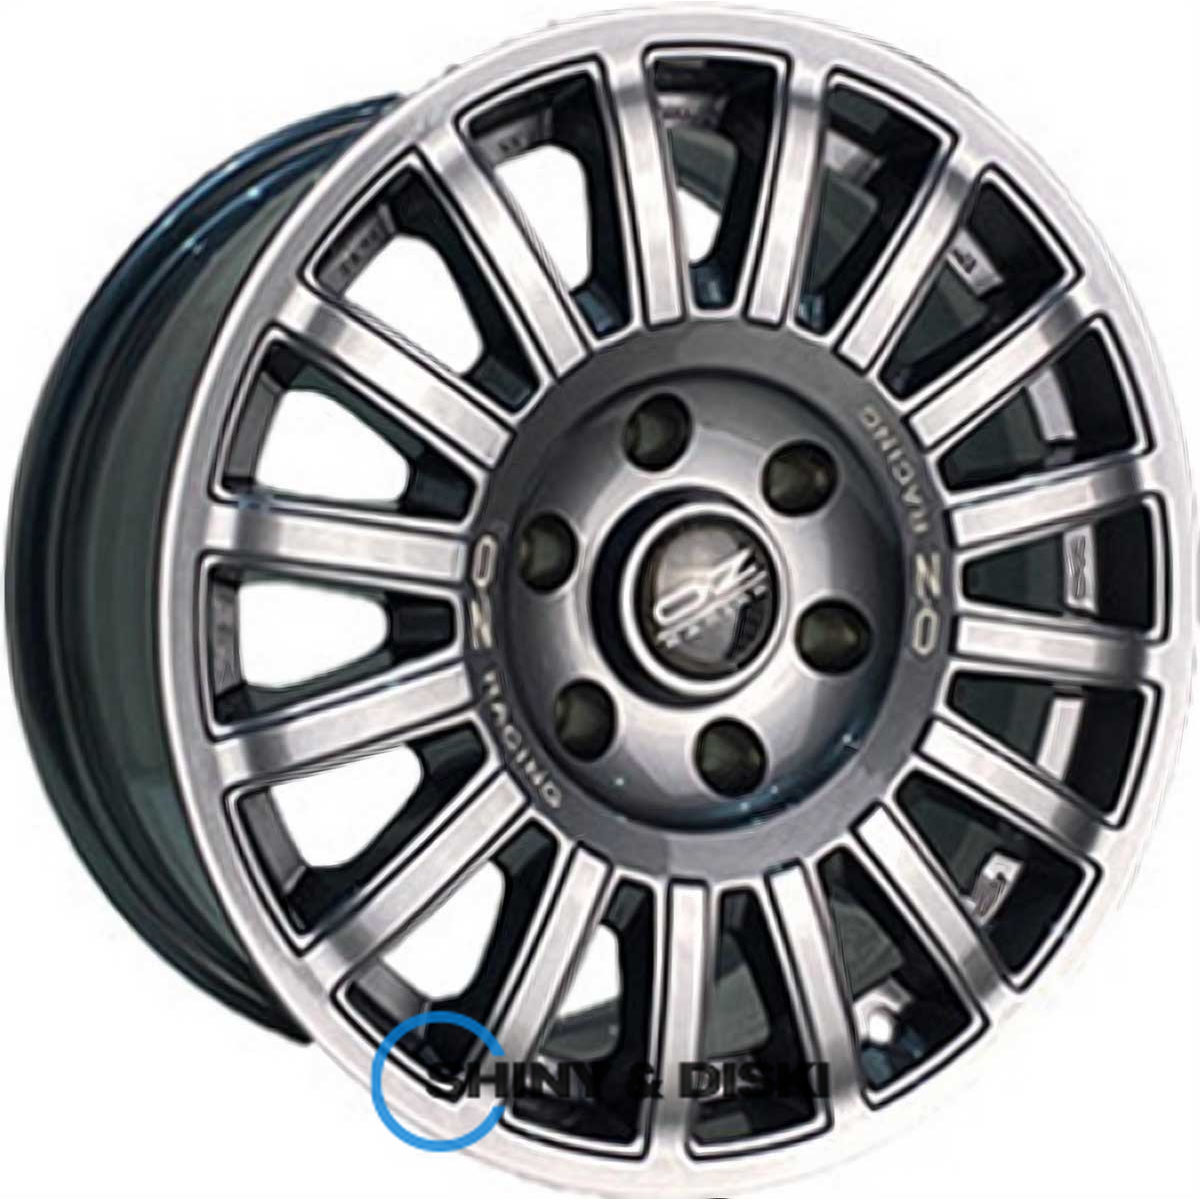 off road wheels ow1908-3 gloss gray